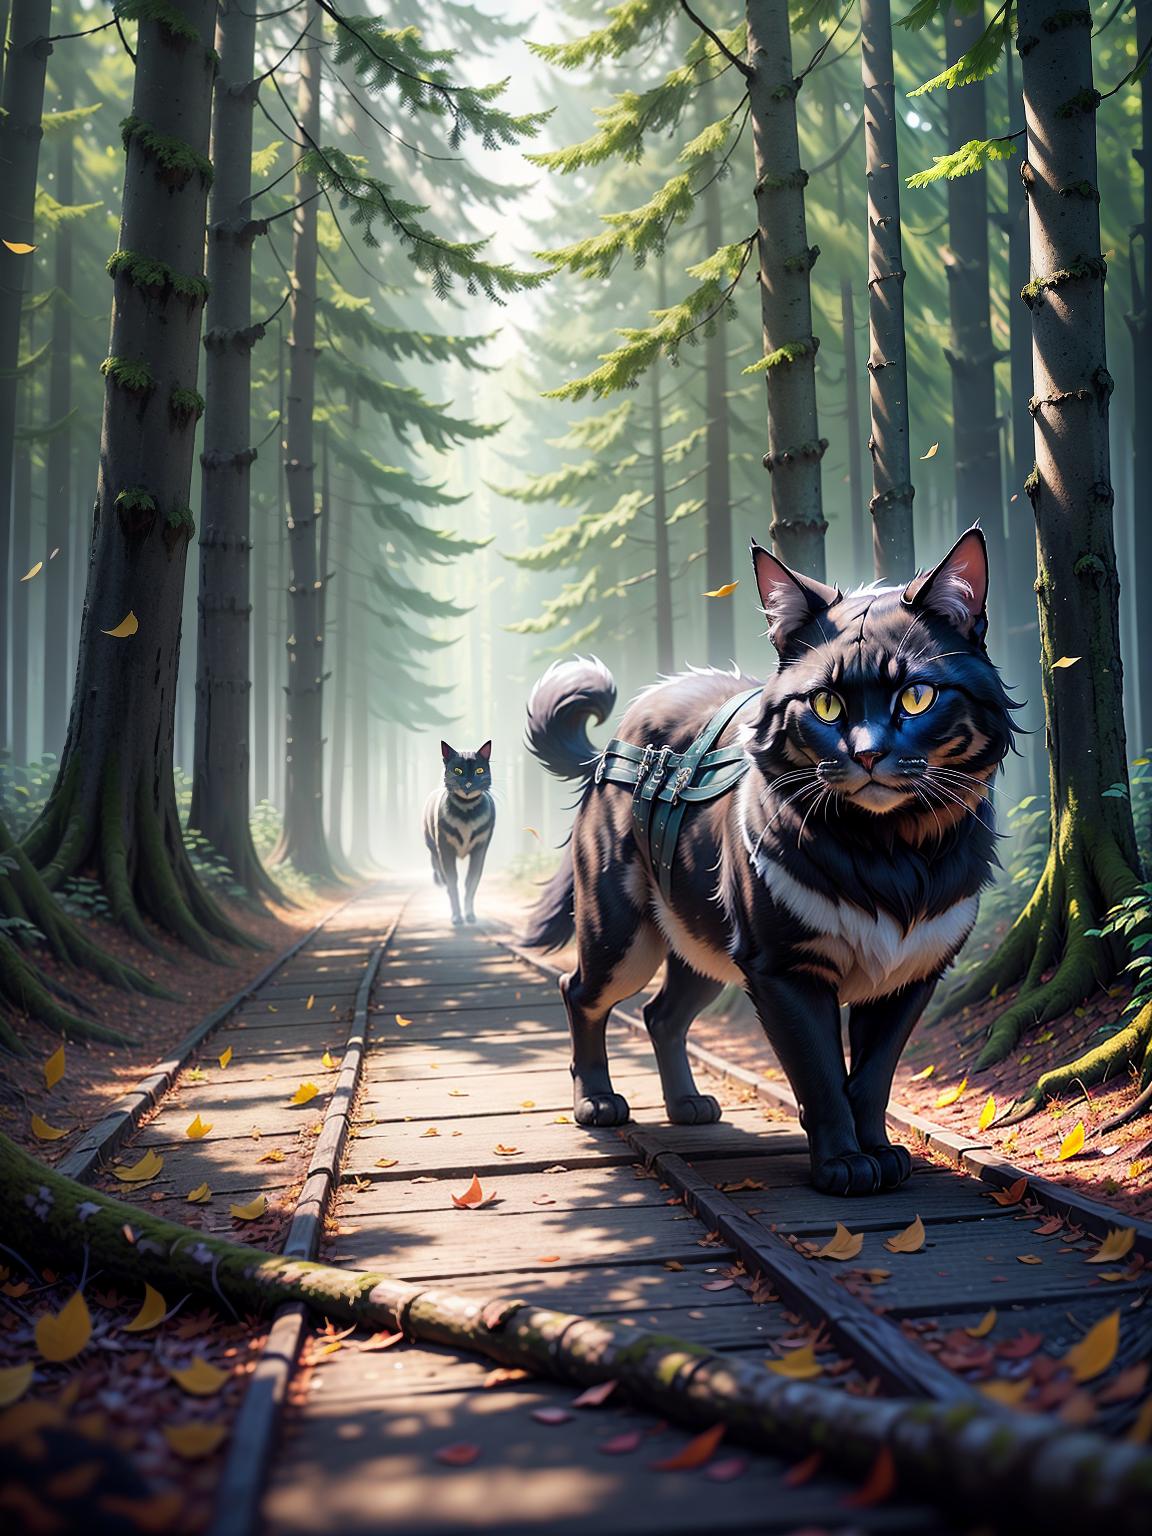  master piece, best quality, ultra detailed, highres, 4k.8k, Black cat, Traveling, carrying a knapsack, looking ahead attentively, standing on a path, Curious, BREAK Adventure of a black cat wearing boots., Forest, Knapsack, trees, fallen leaves, signpost, BREAK Mysterious, Sunlight filtering through the trees, soft shadows on the ground, crystallineAI